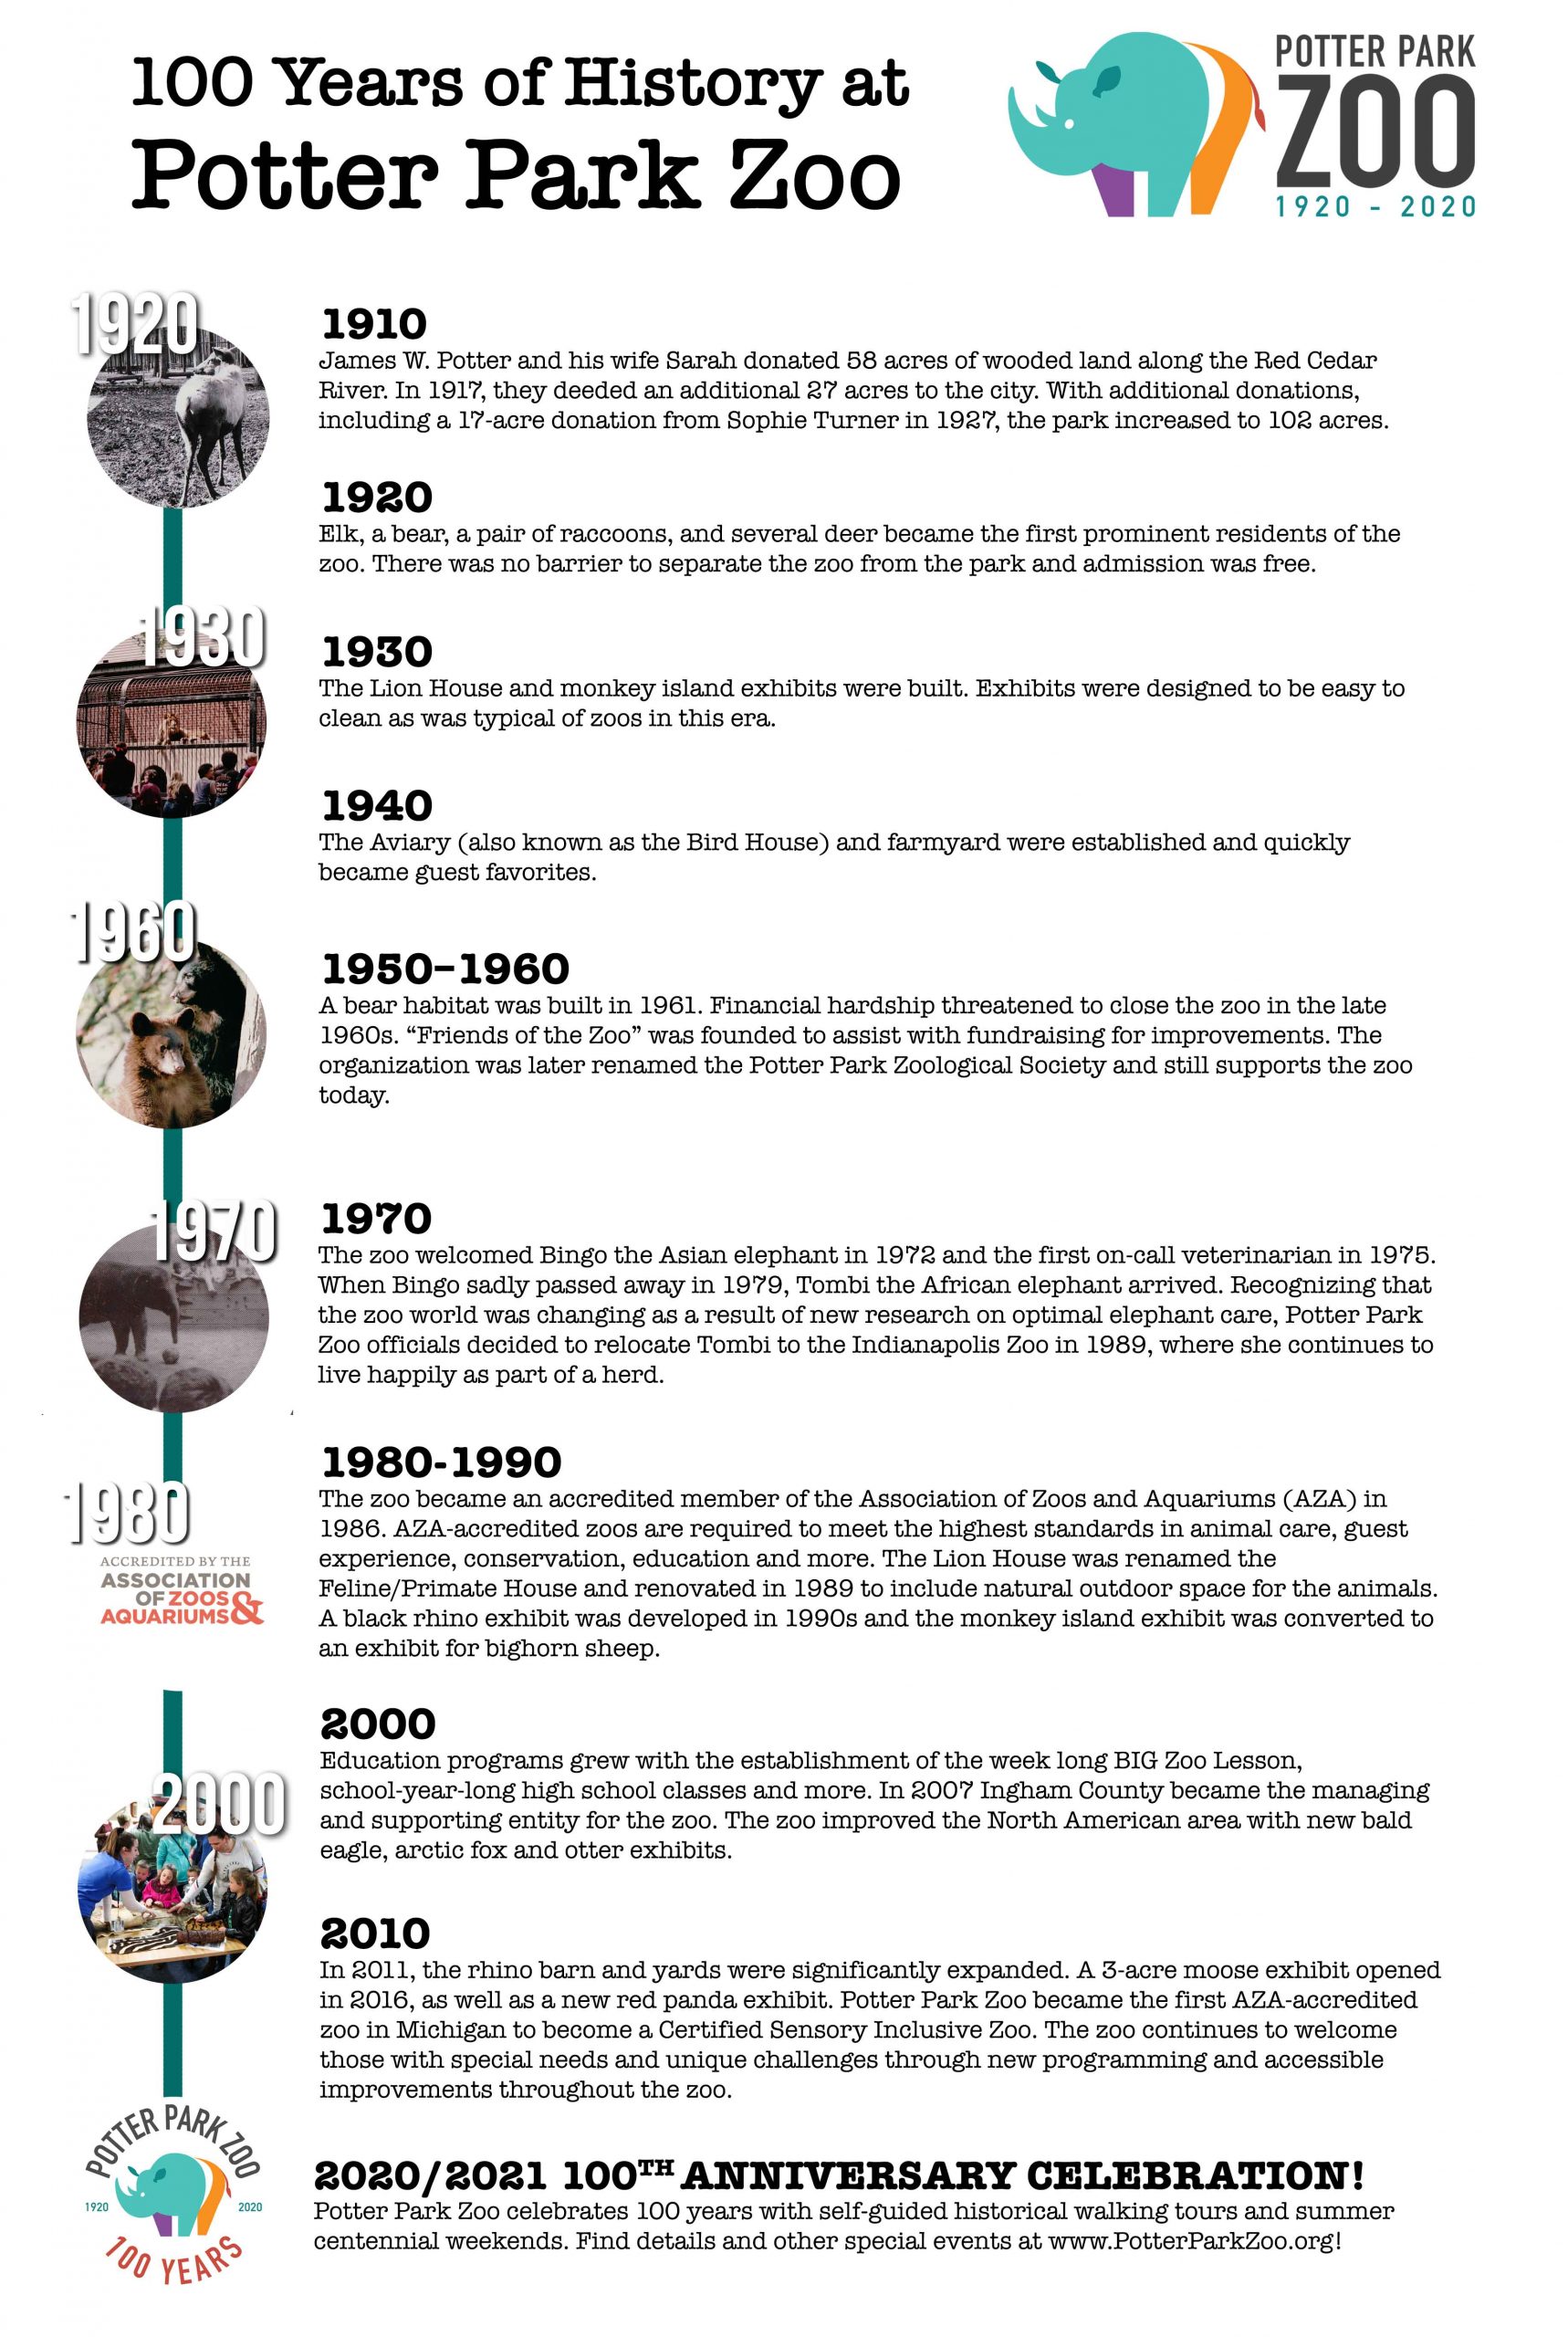 Info graphic with timeline from 1910-2021 with the title 100 years of History at Potter Park Zoo.